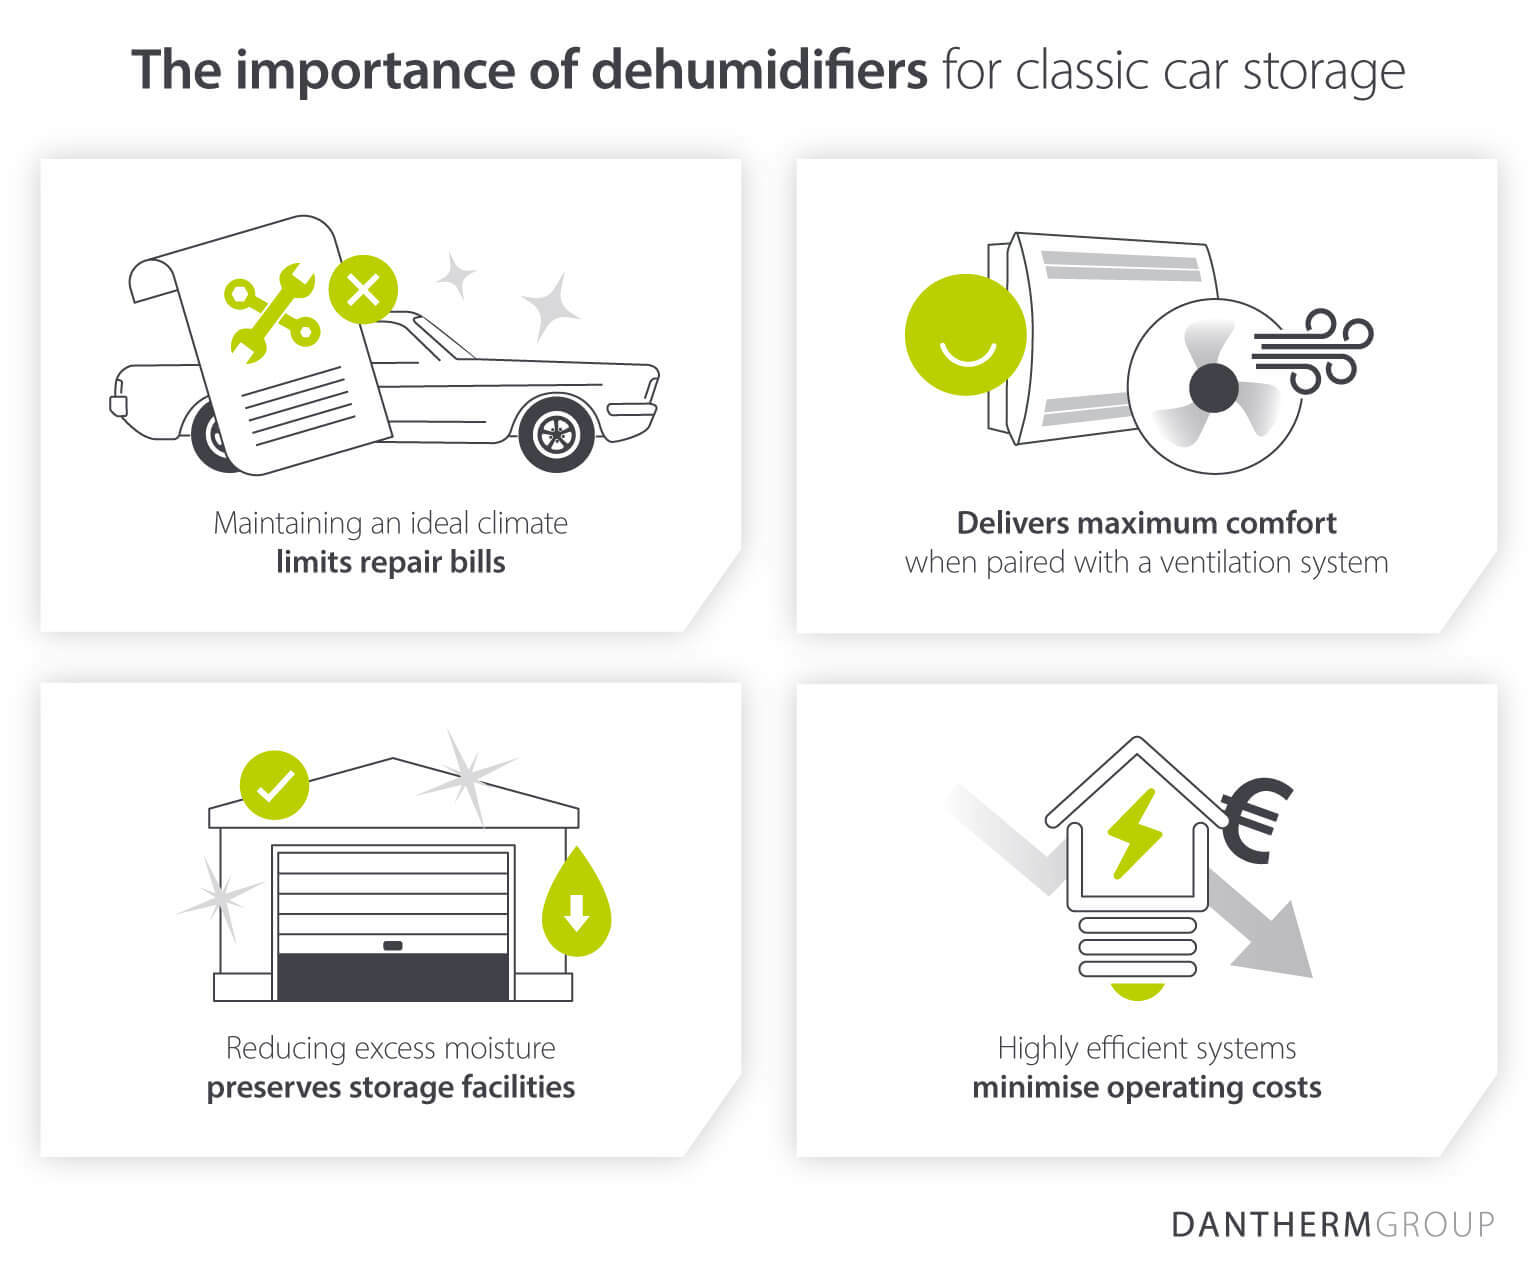 The importance and benefits of dehumidifiers for classic car storage